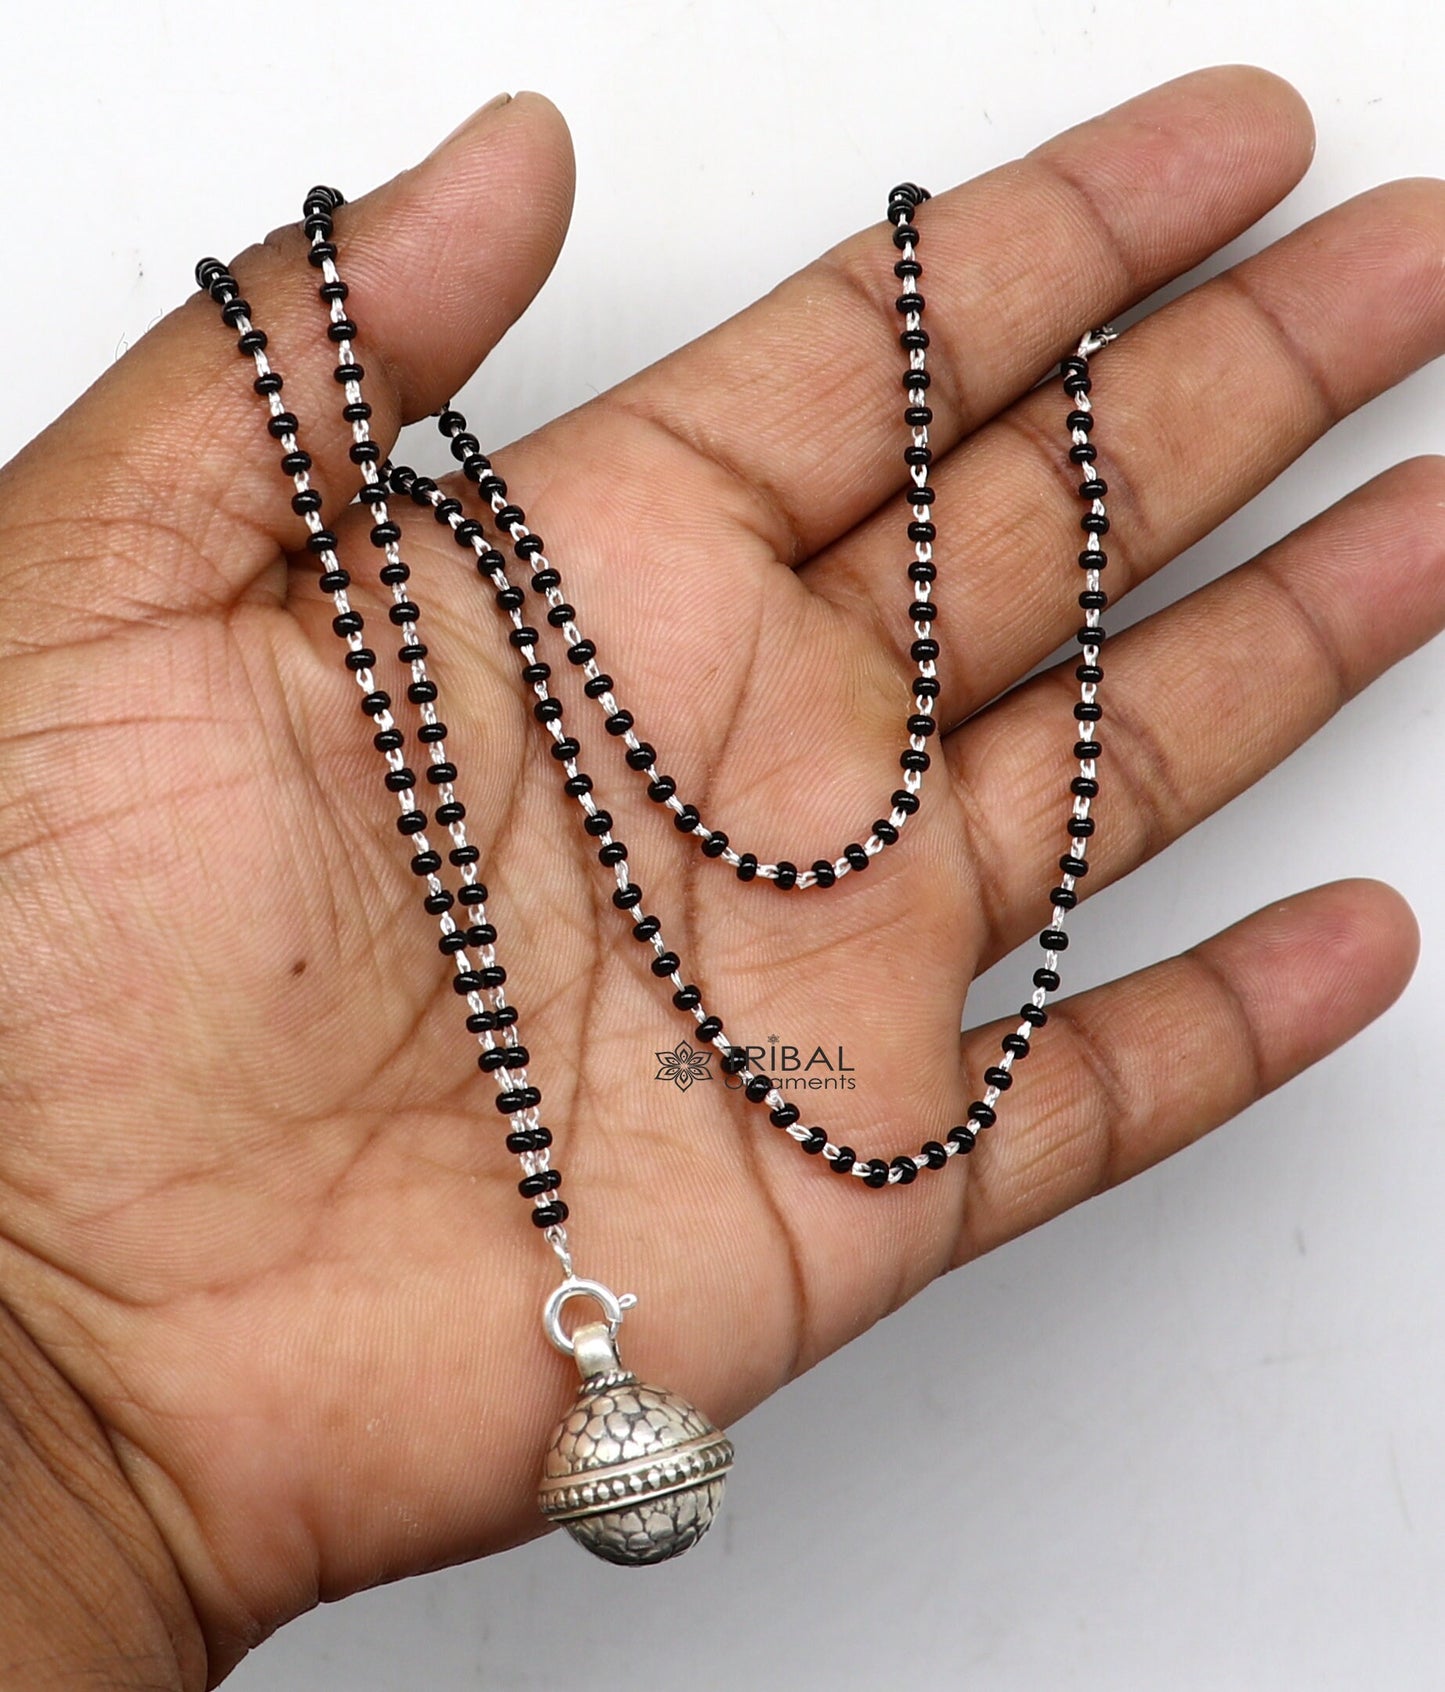 16" to 26" traditional cultural black beads 925 sterling silver stylish Single ball pendant necklace modern trendy delicate jewelry set625 - TRIBAL ORNAMENTS